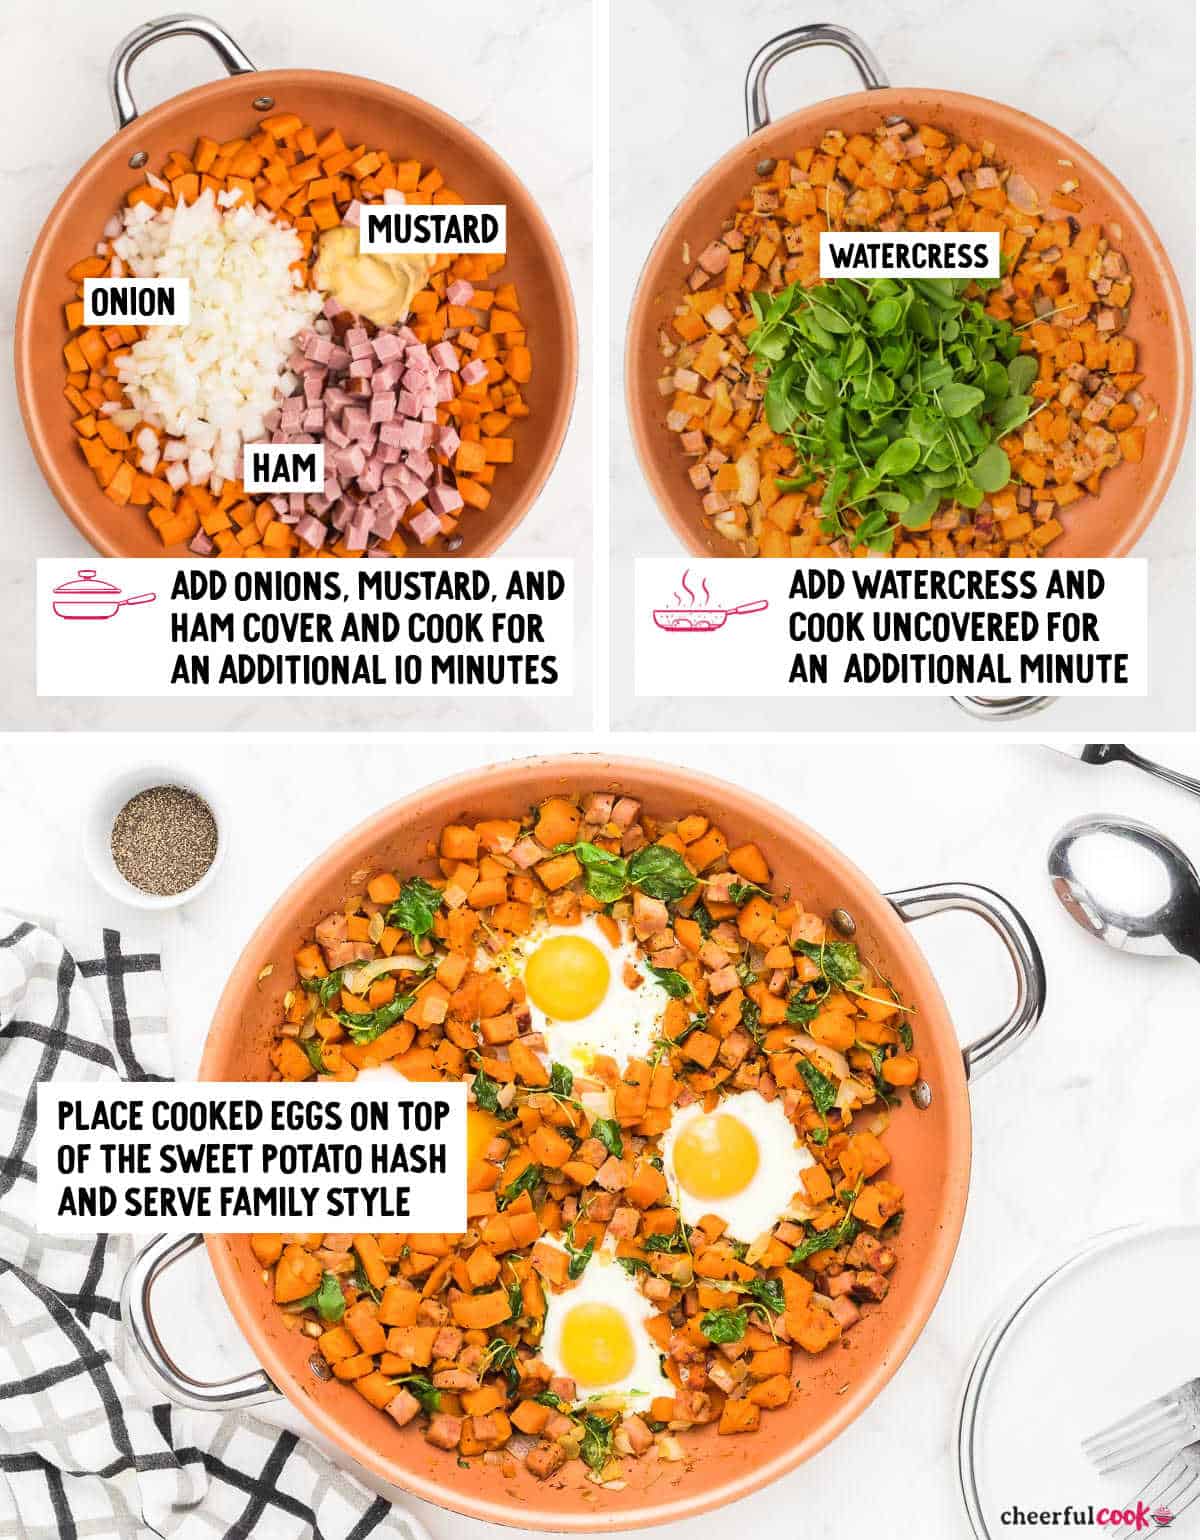 process steps showing how to make Sweet Potato Hash